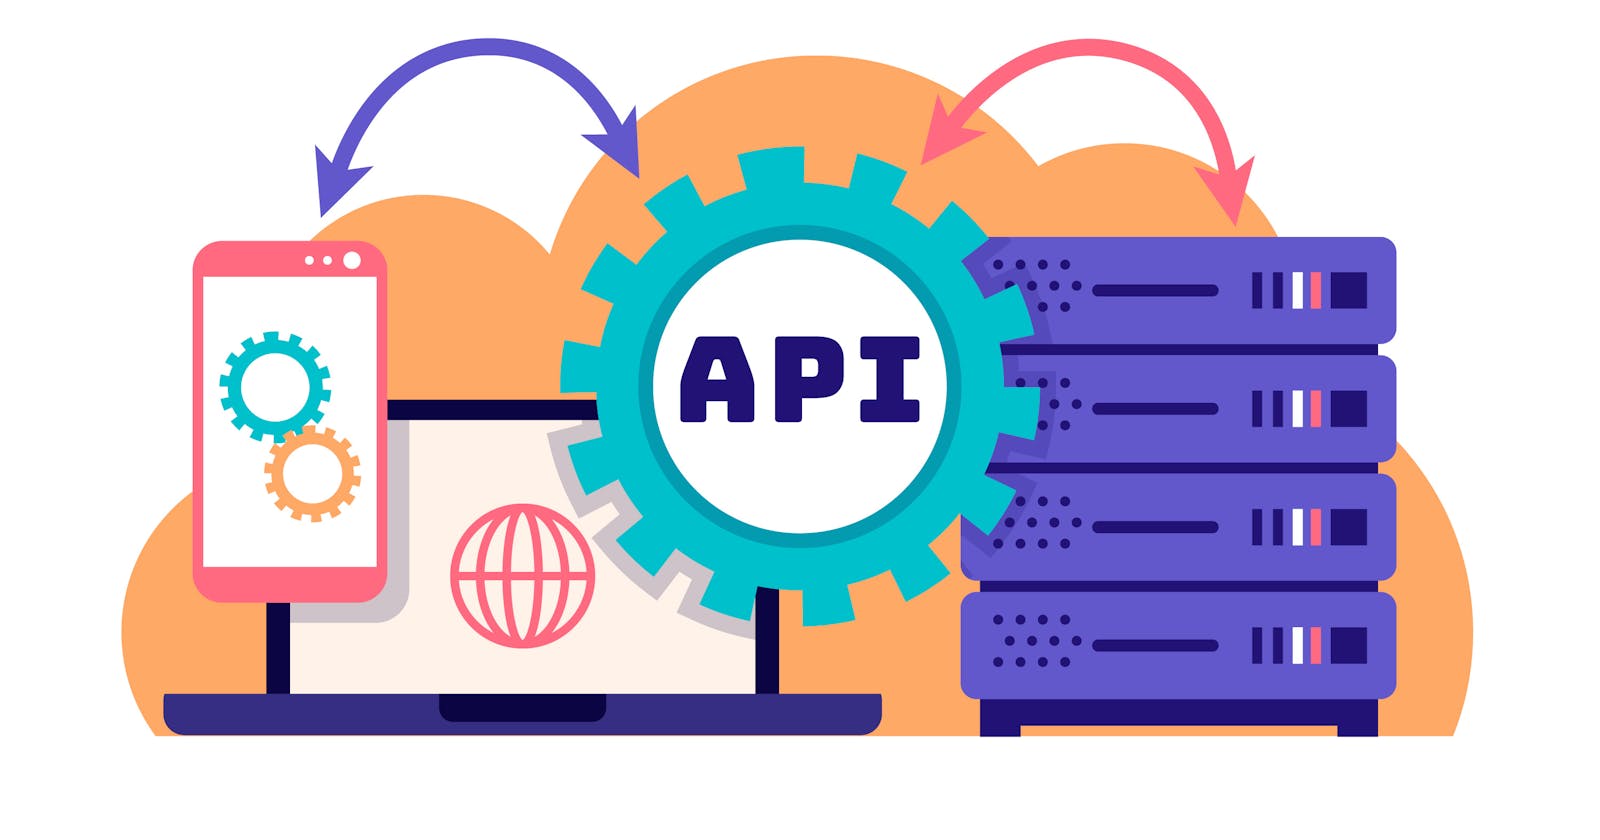 APIs: The Software Middlemen